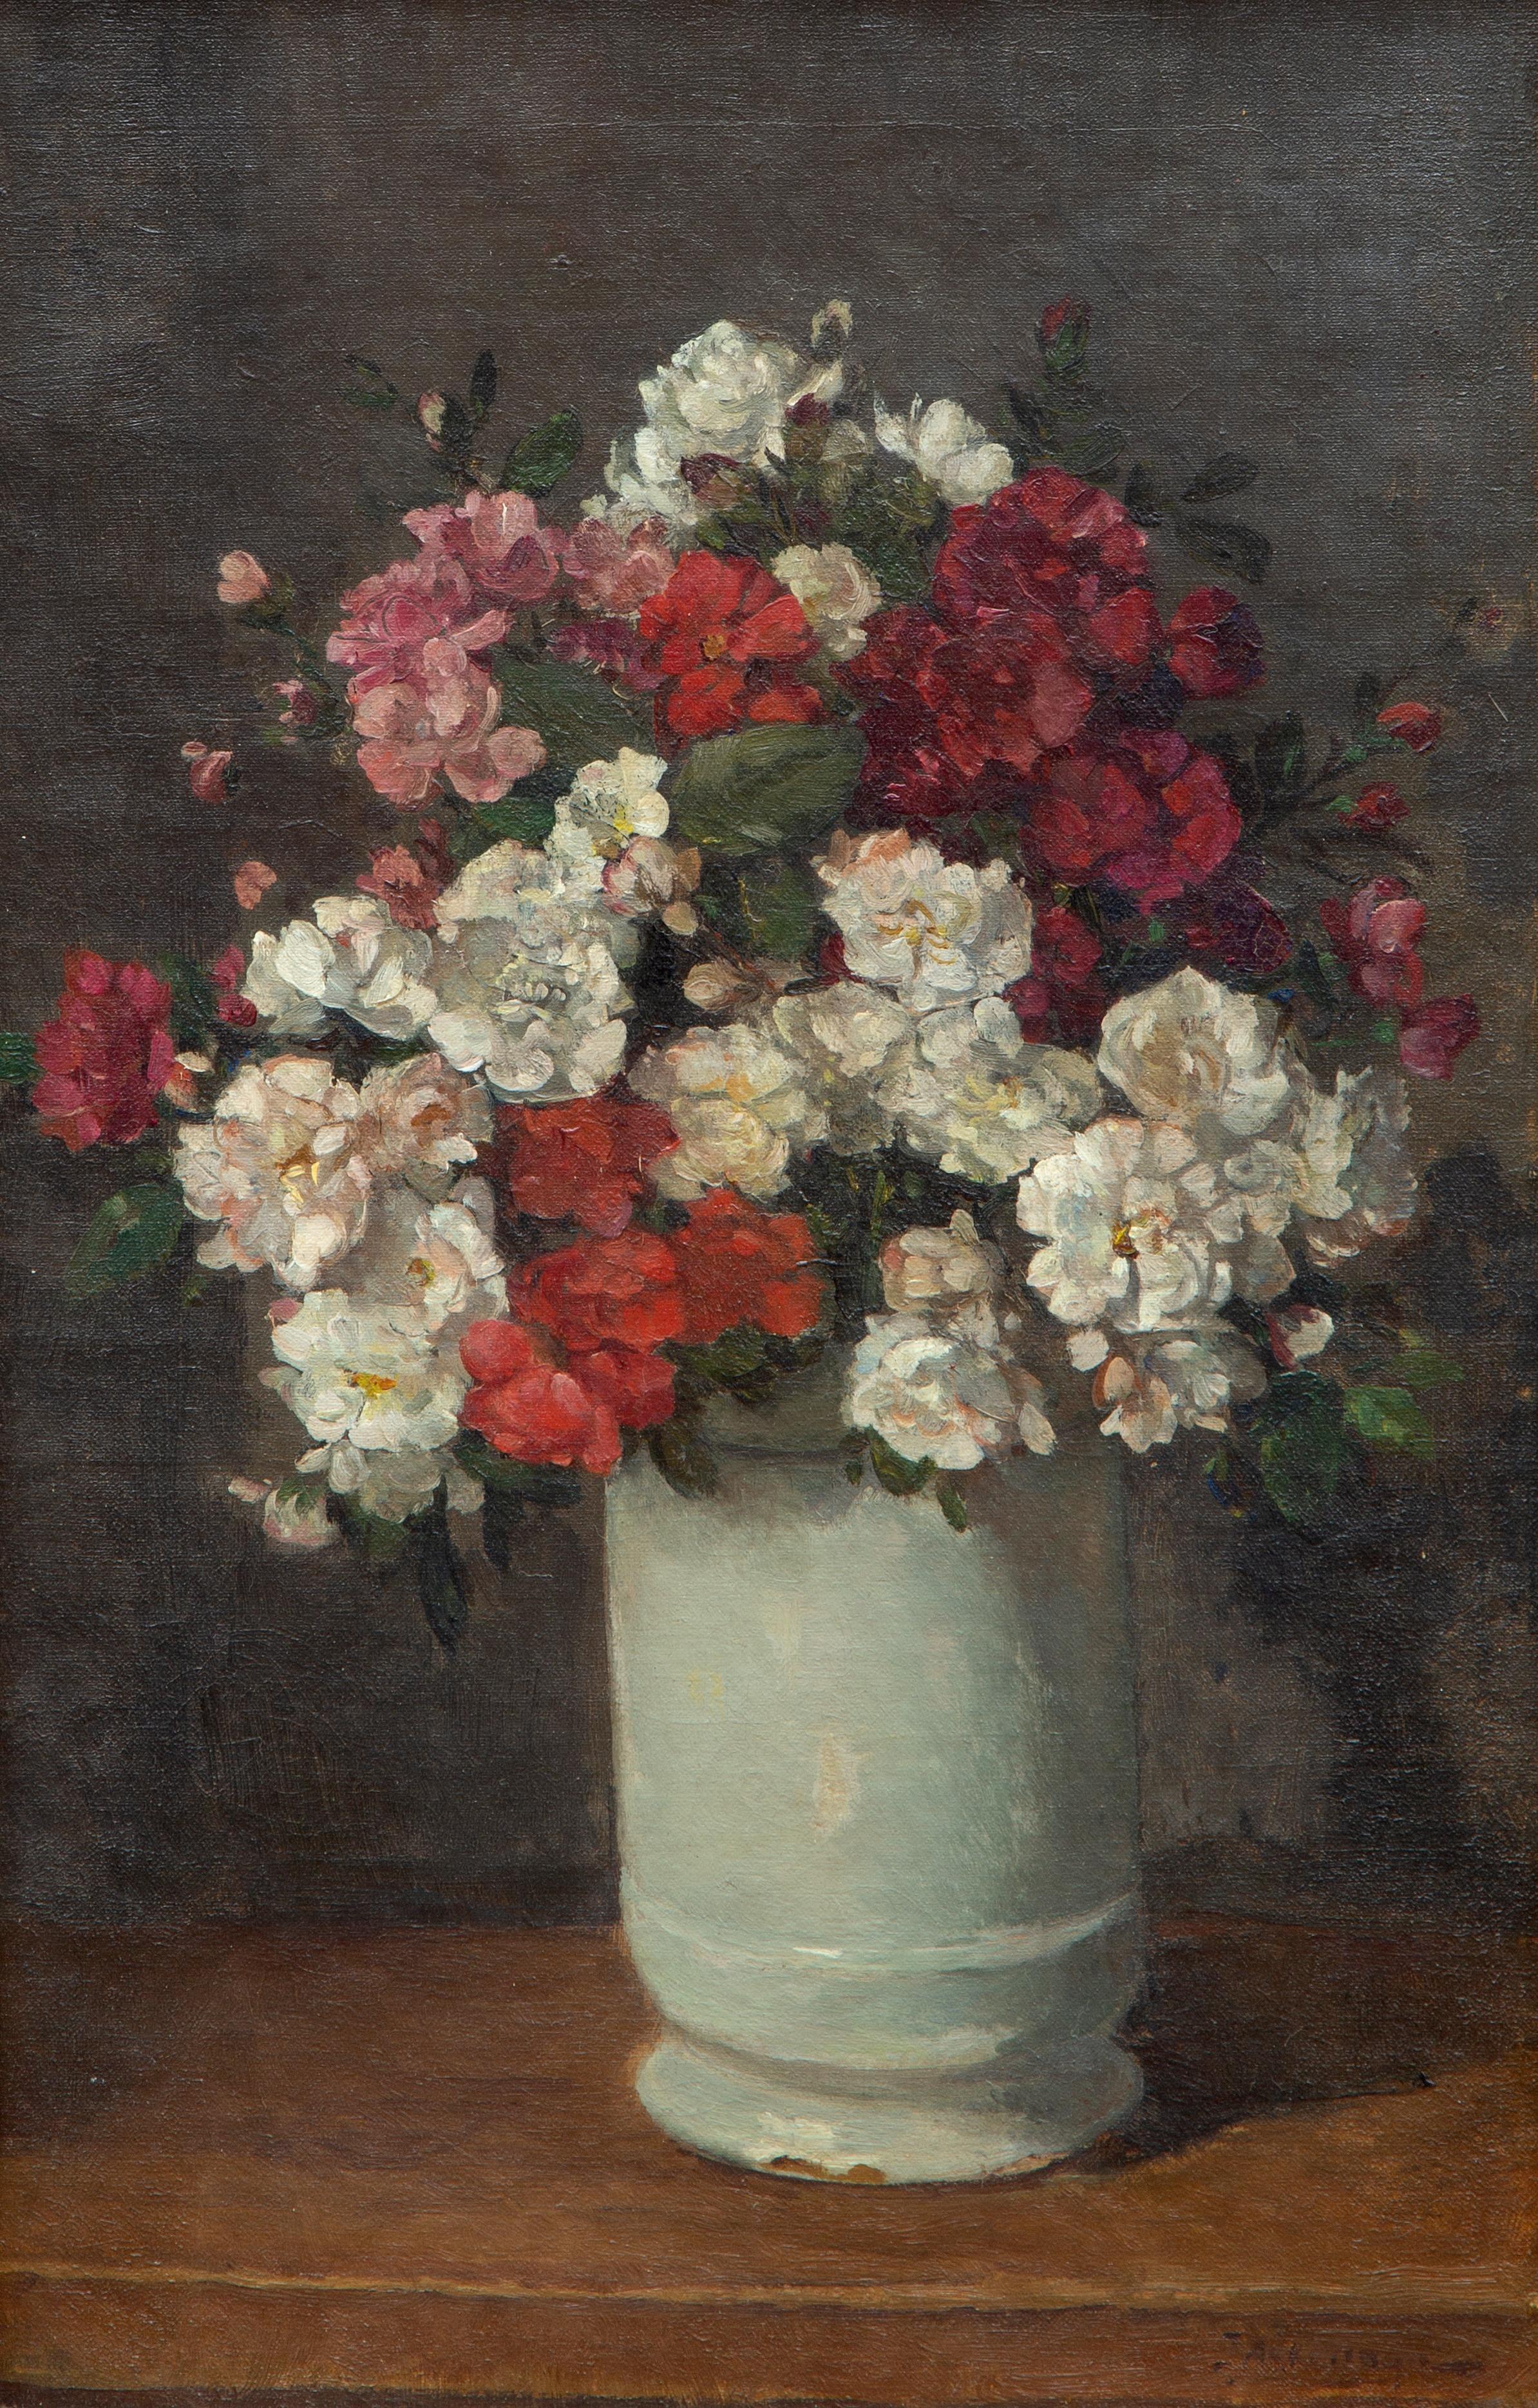 A still life of flowers in a gray vase